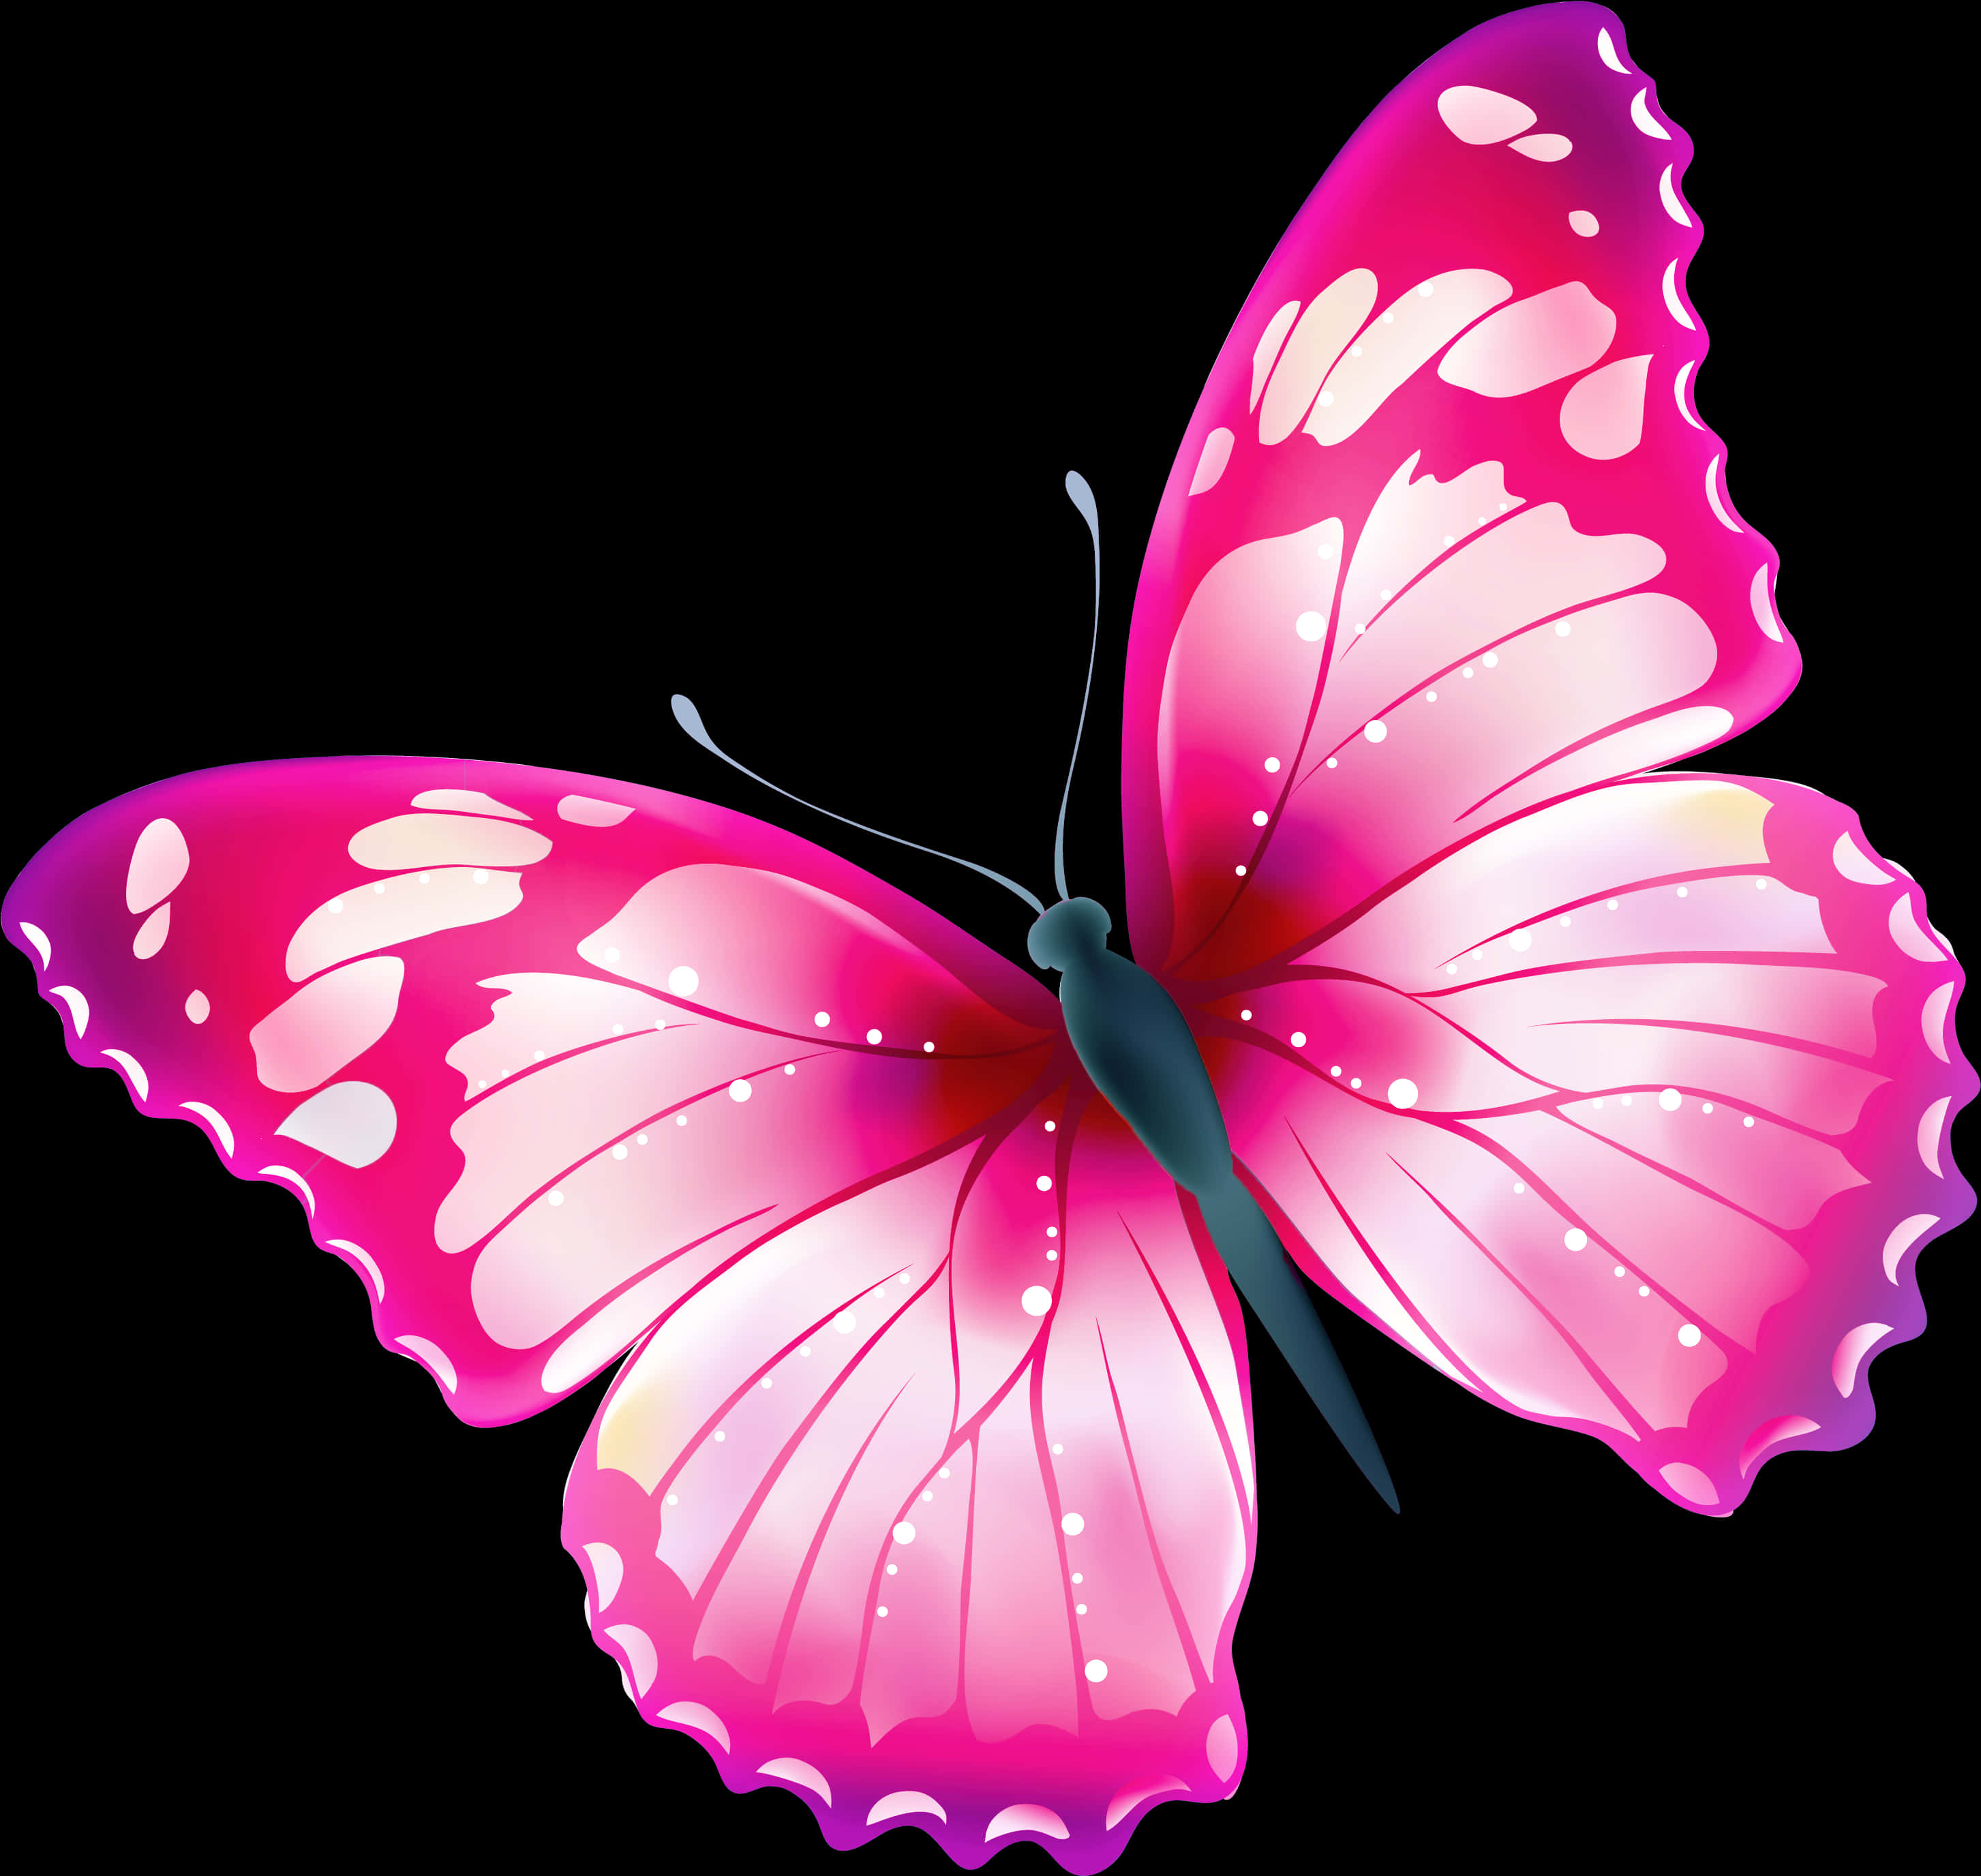 A Pink Butterfly With White Spots